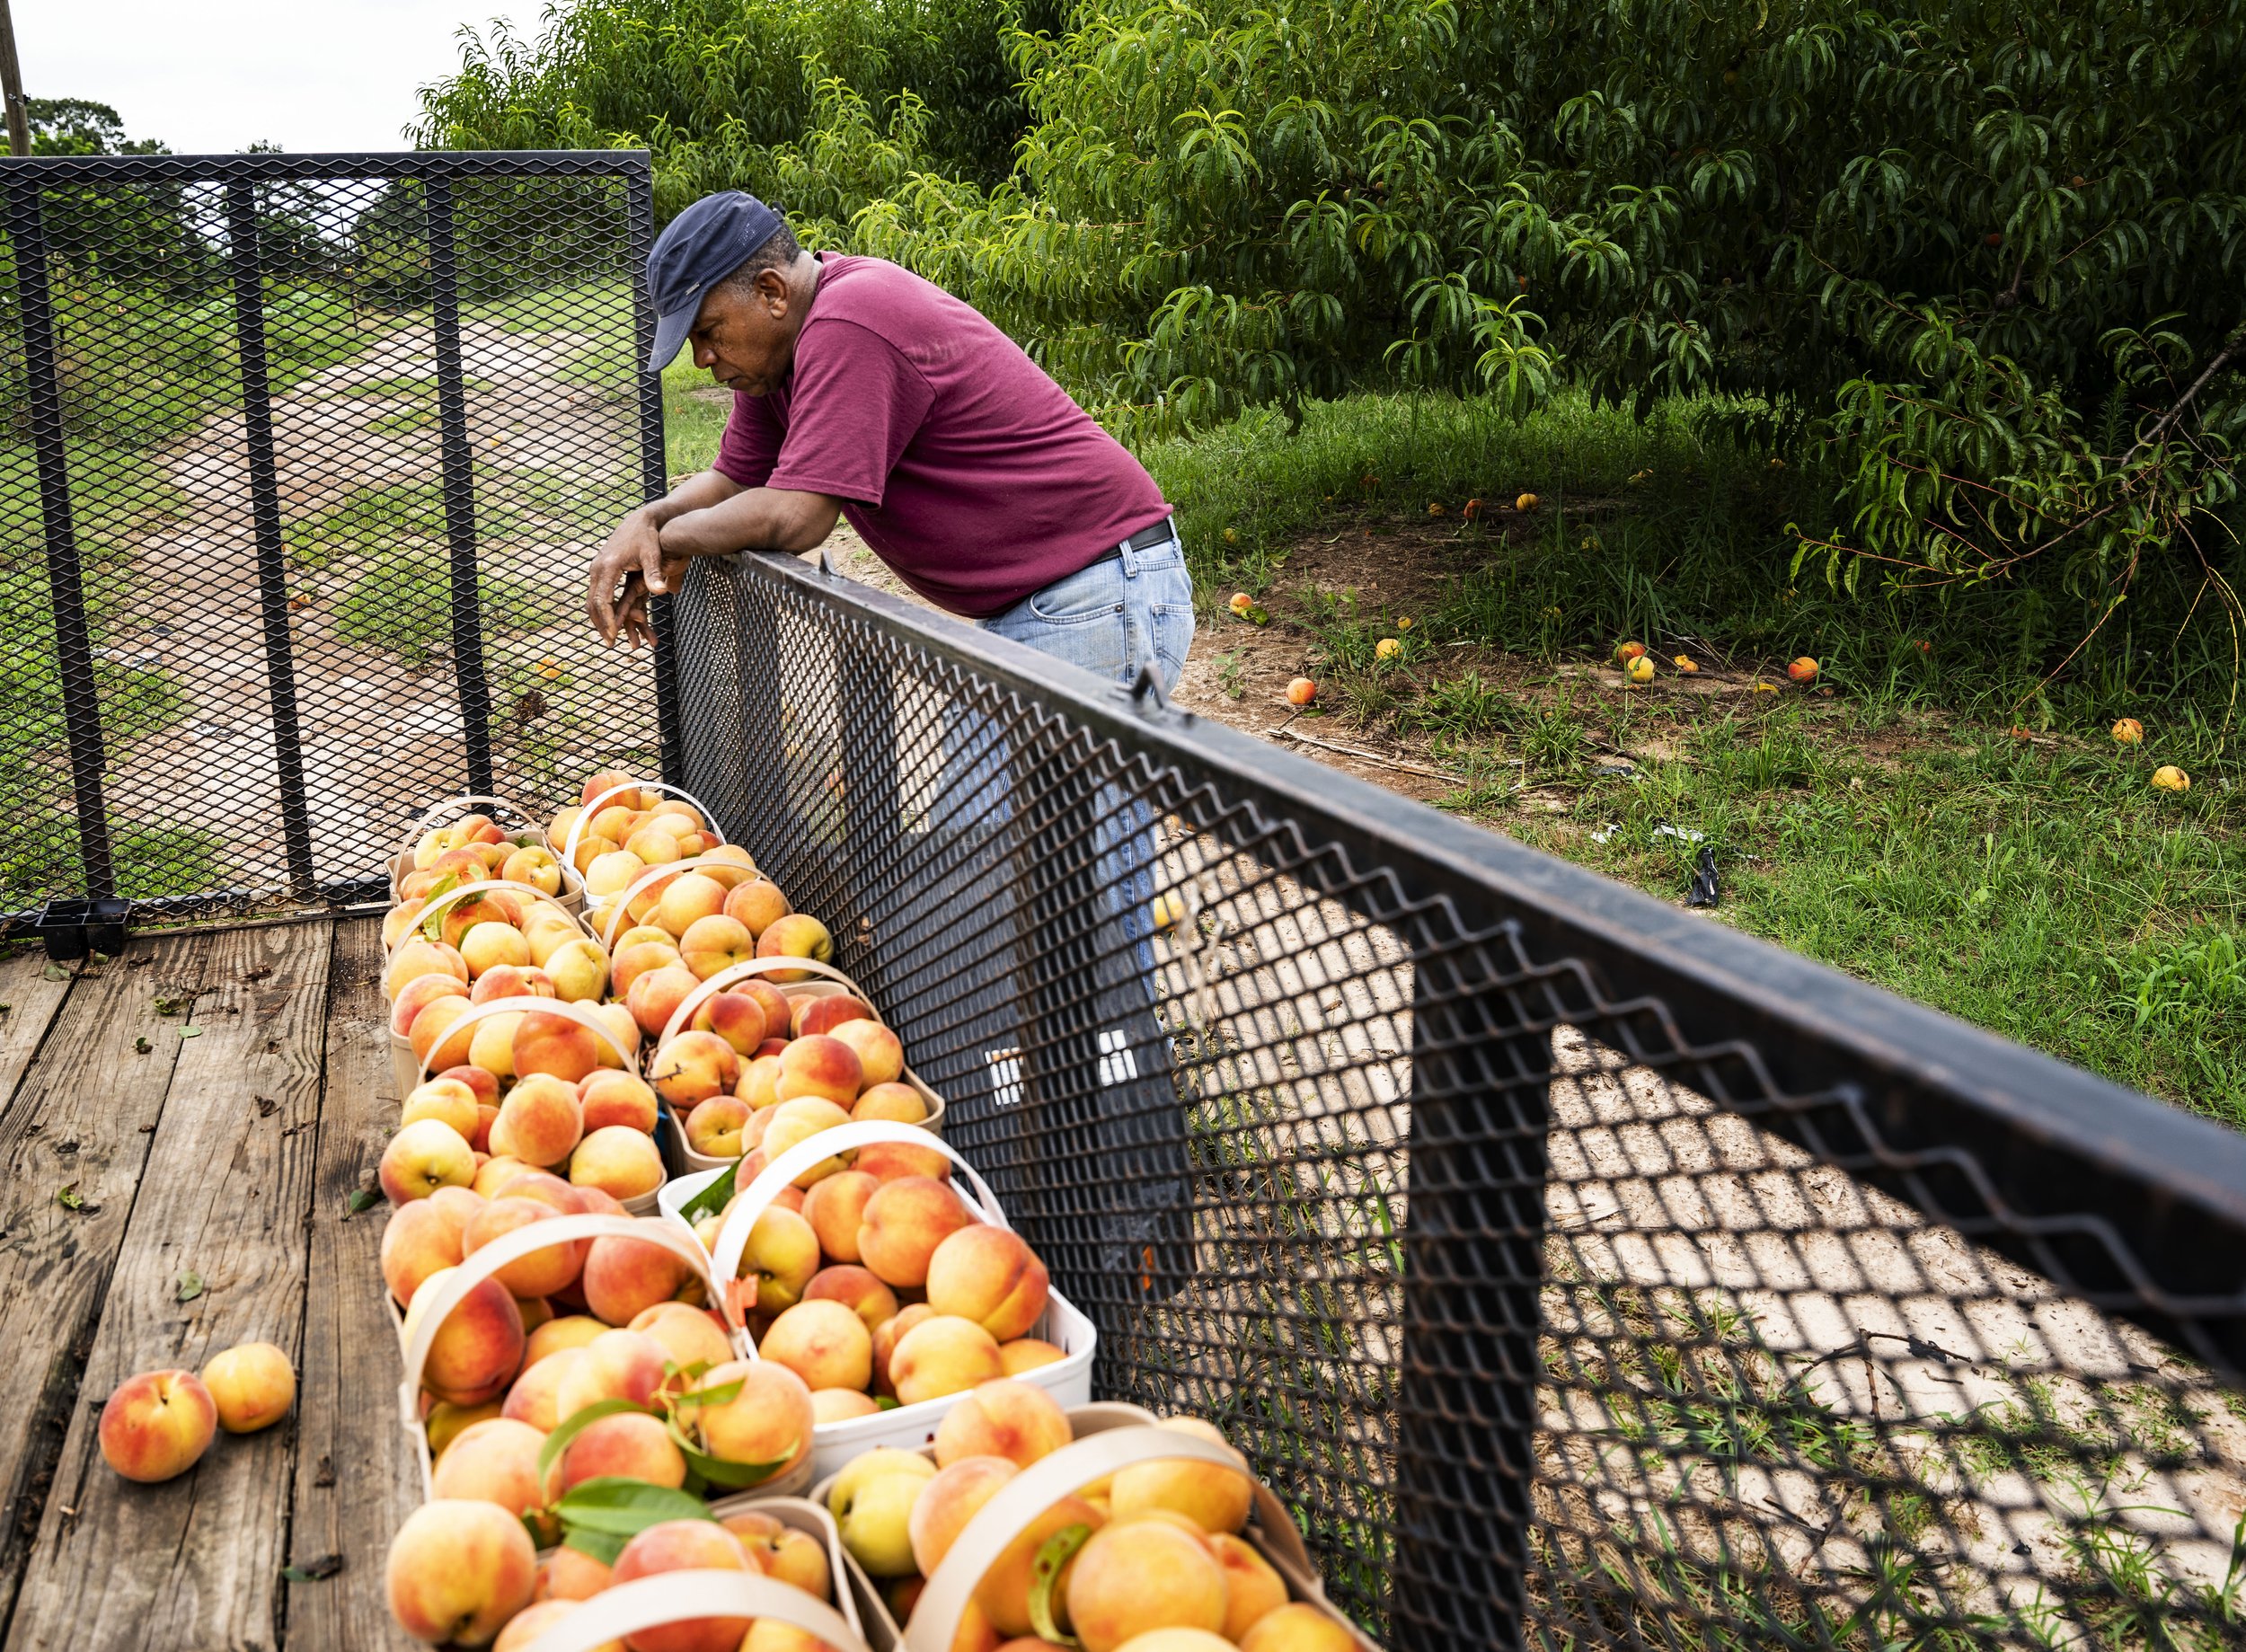  Robert Jackson takes a moment to himself after collecting peaches on his farm in Lyman, Monday July 11, 2022.  